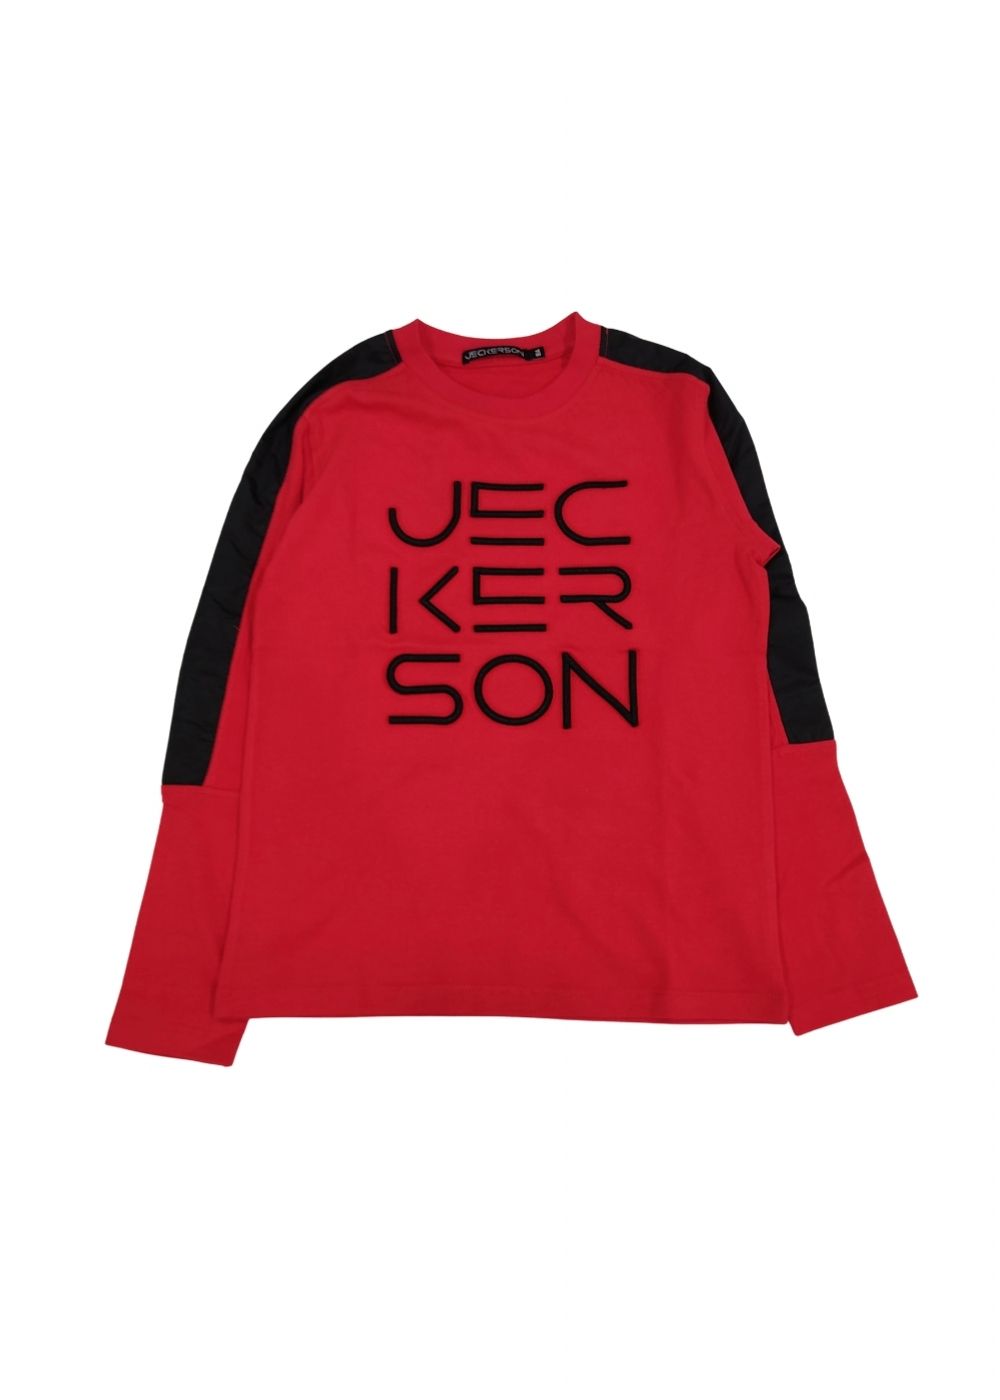 Featured image for “JECKERSON T-SHIRT ROSSA”